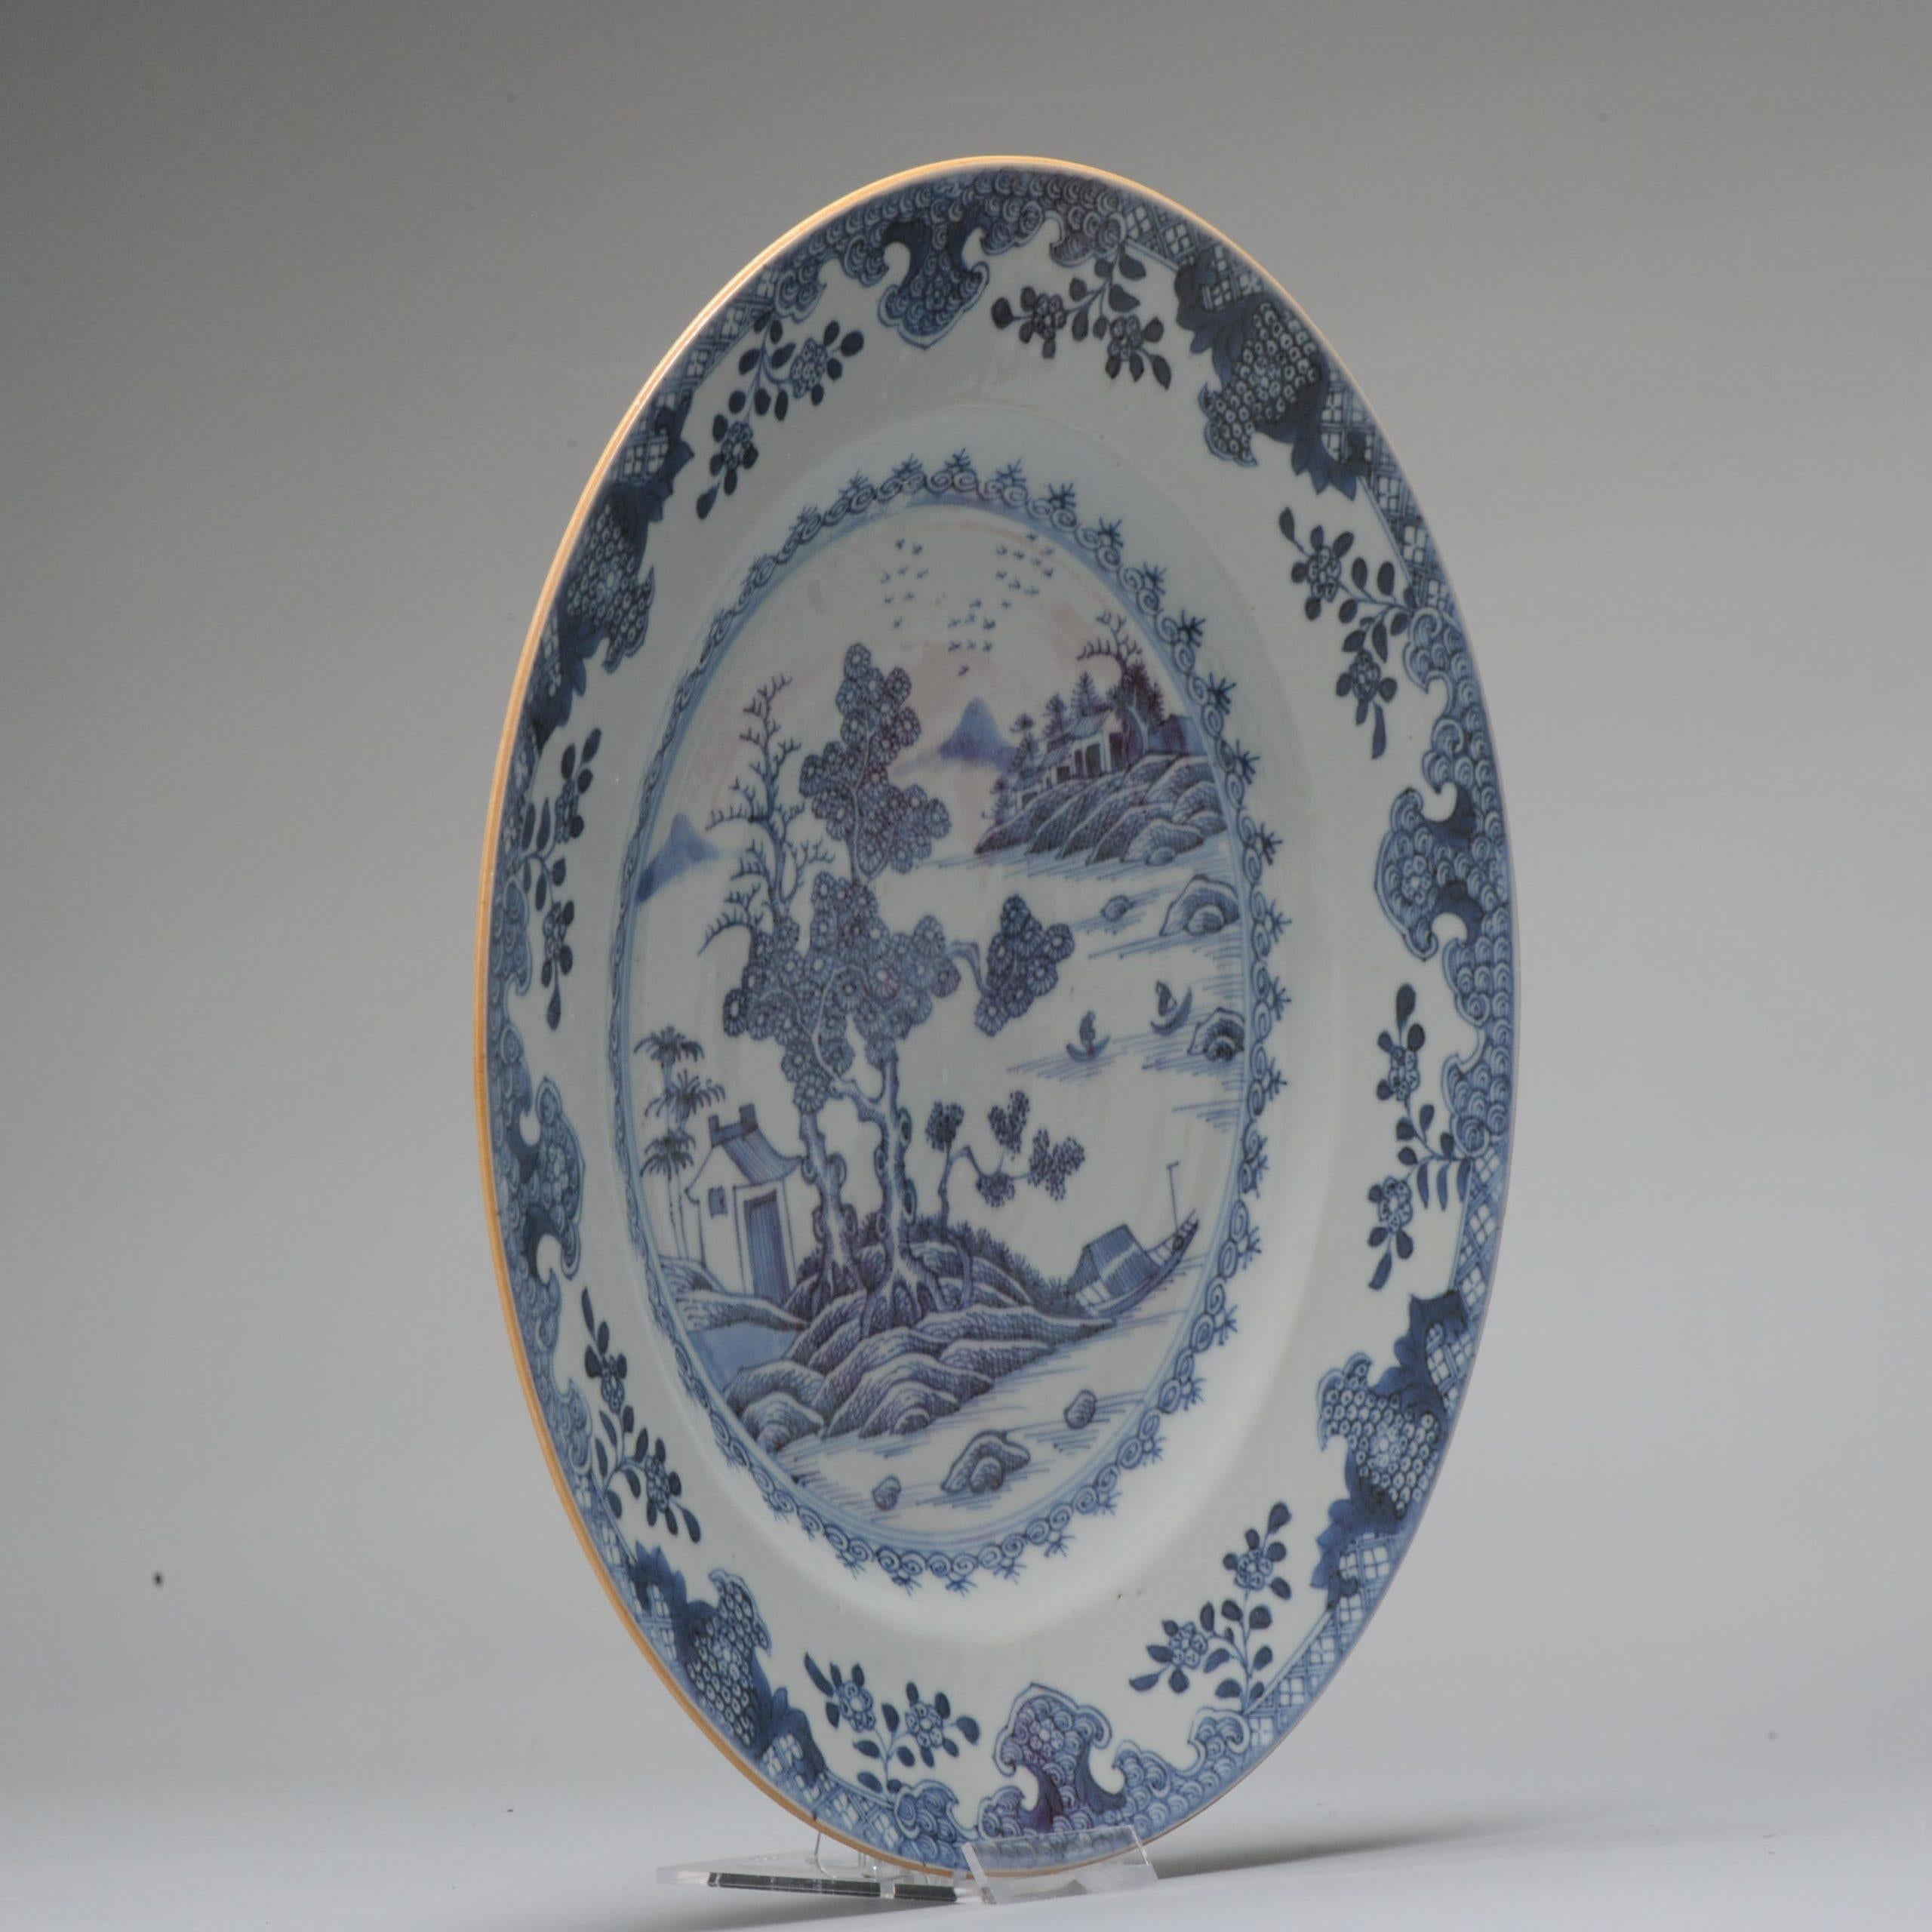 A very nicely plate, typical 18th century period piece.

Additional information:
Material: Porcelain & Pottery
Type: Plates
Color: Blue & White
Region of Origin: China
Period: 18th century Qing (1661 - 1912)
Age: Pre-1800
Condition: 3 lines from rim